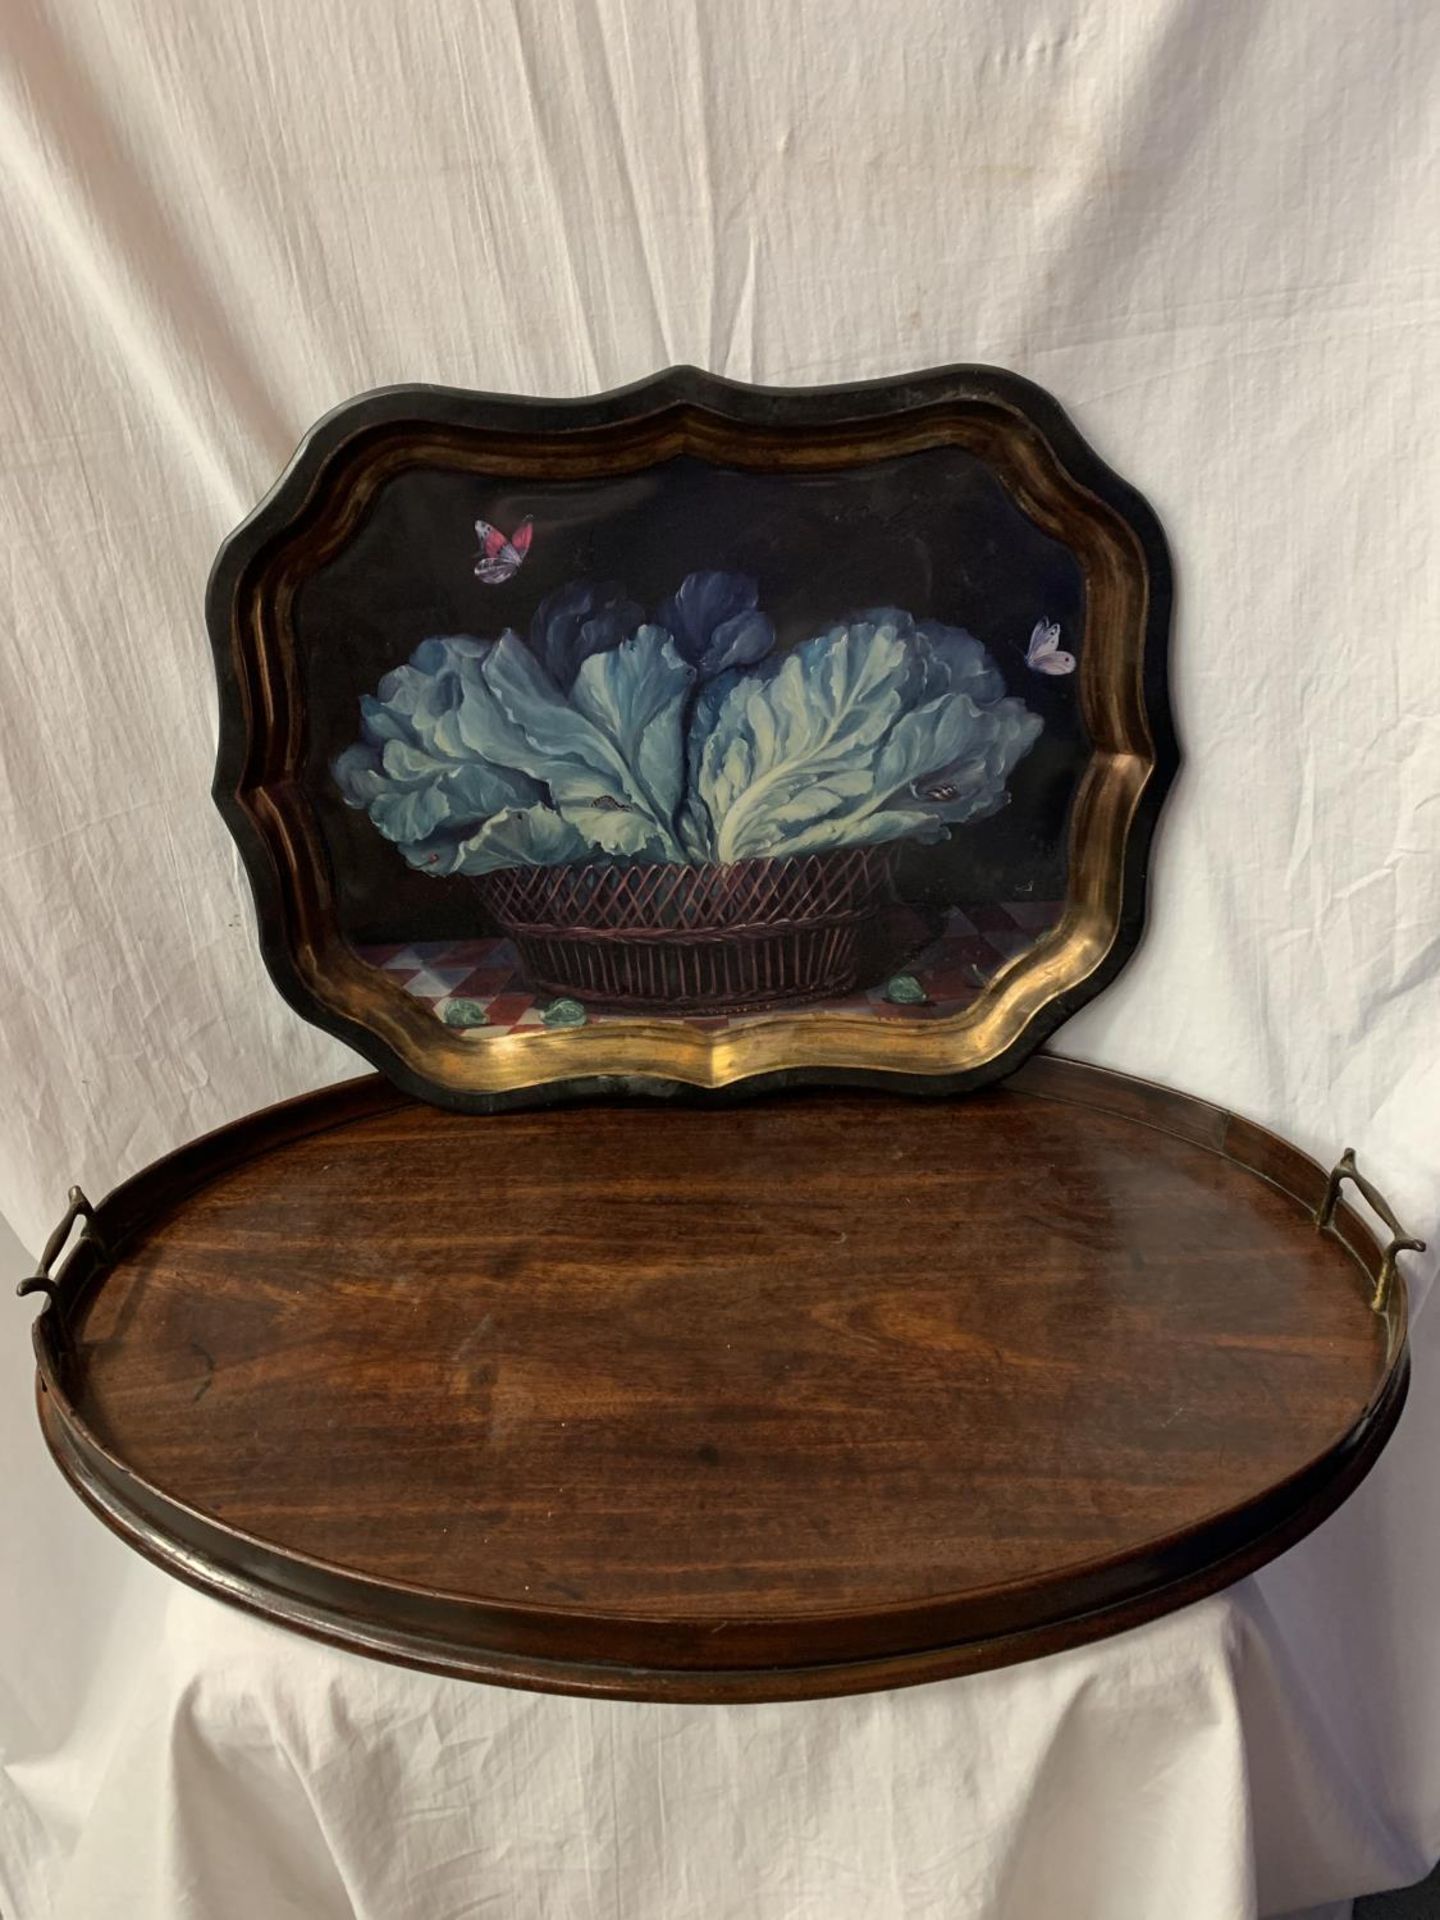 A LARGE WOODEN OVAL BUTLERS TRAY AND A DECORATIVE TIN TRAY WITH VEGETABLE BOWL DESIGN